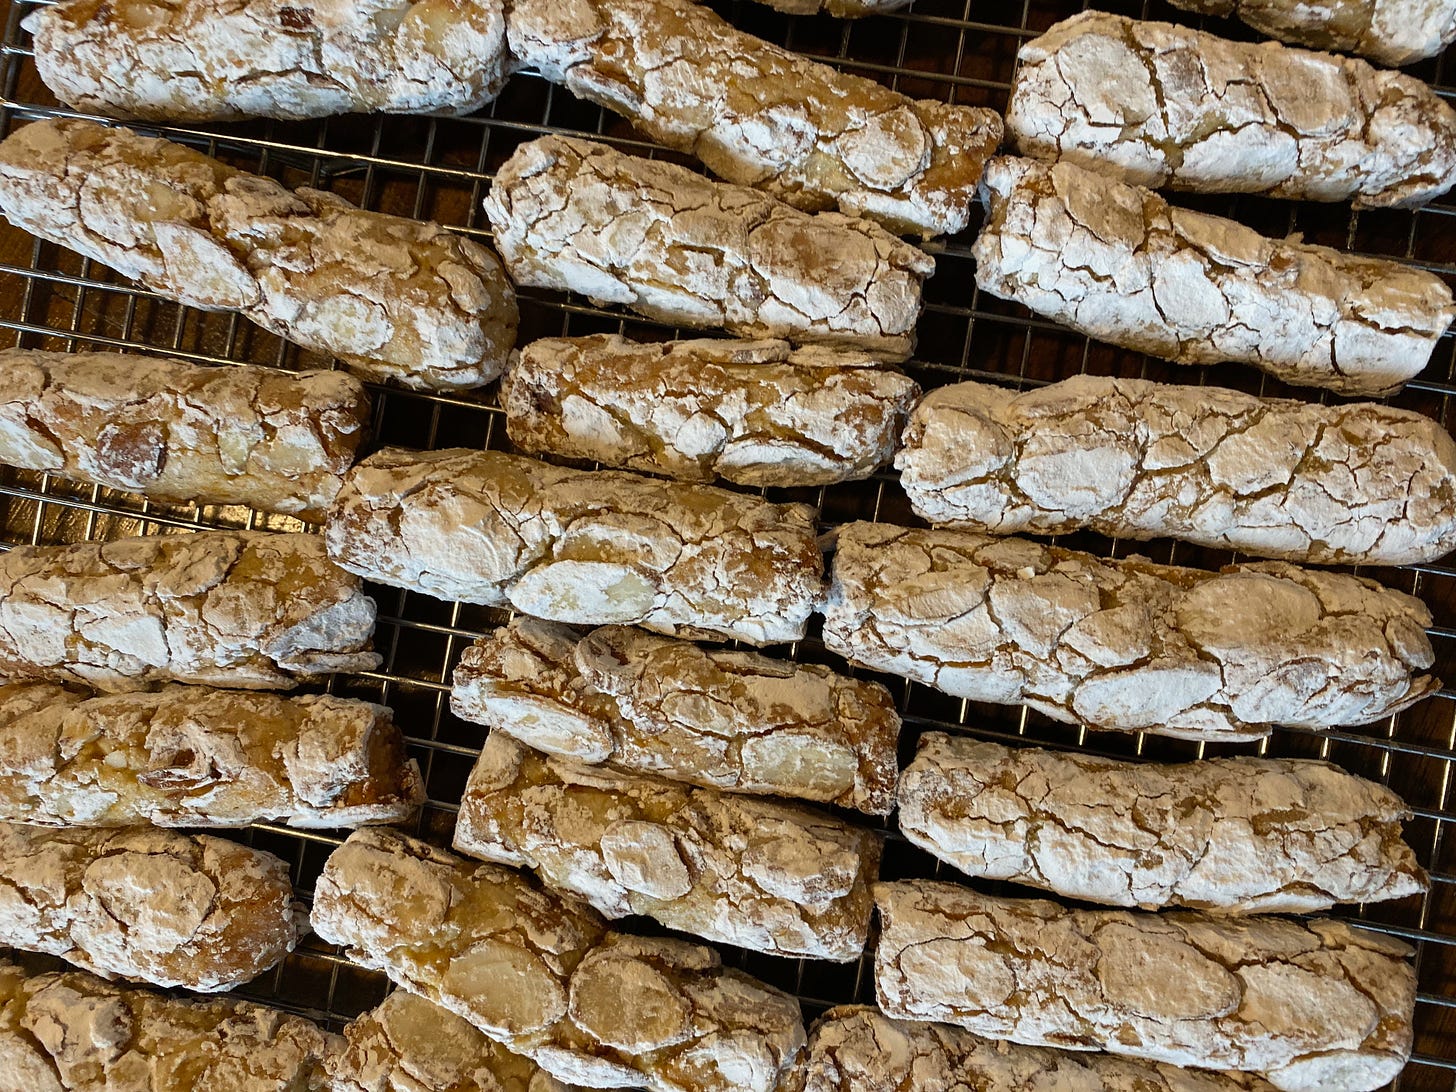 Several rows of small cylindrical, log-shaped cookies sit on a metal cooling rack. They have flaked almonds pressed into them and are coated in powdered sugar.